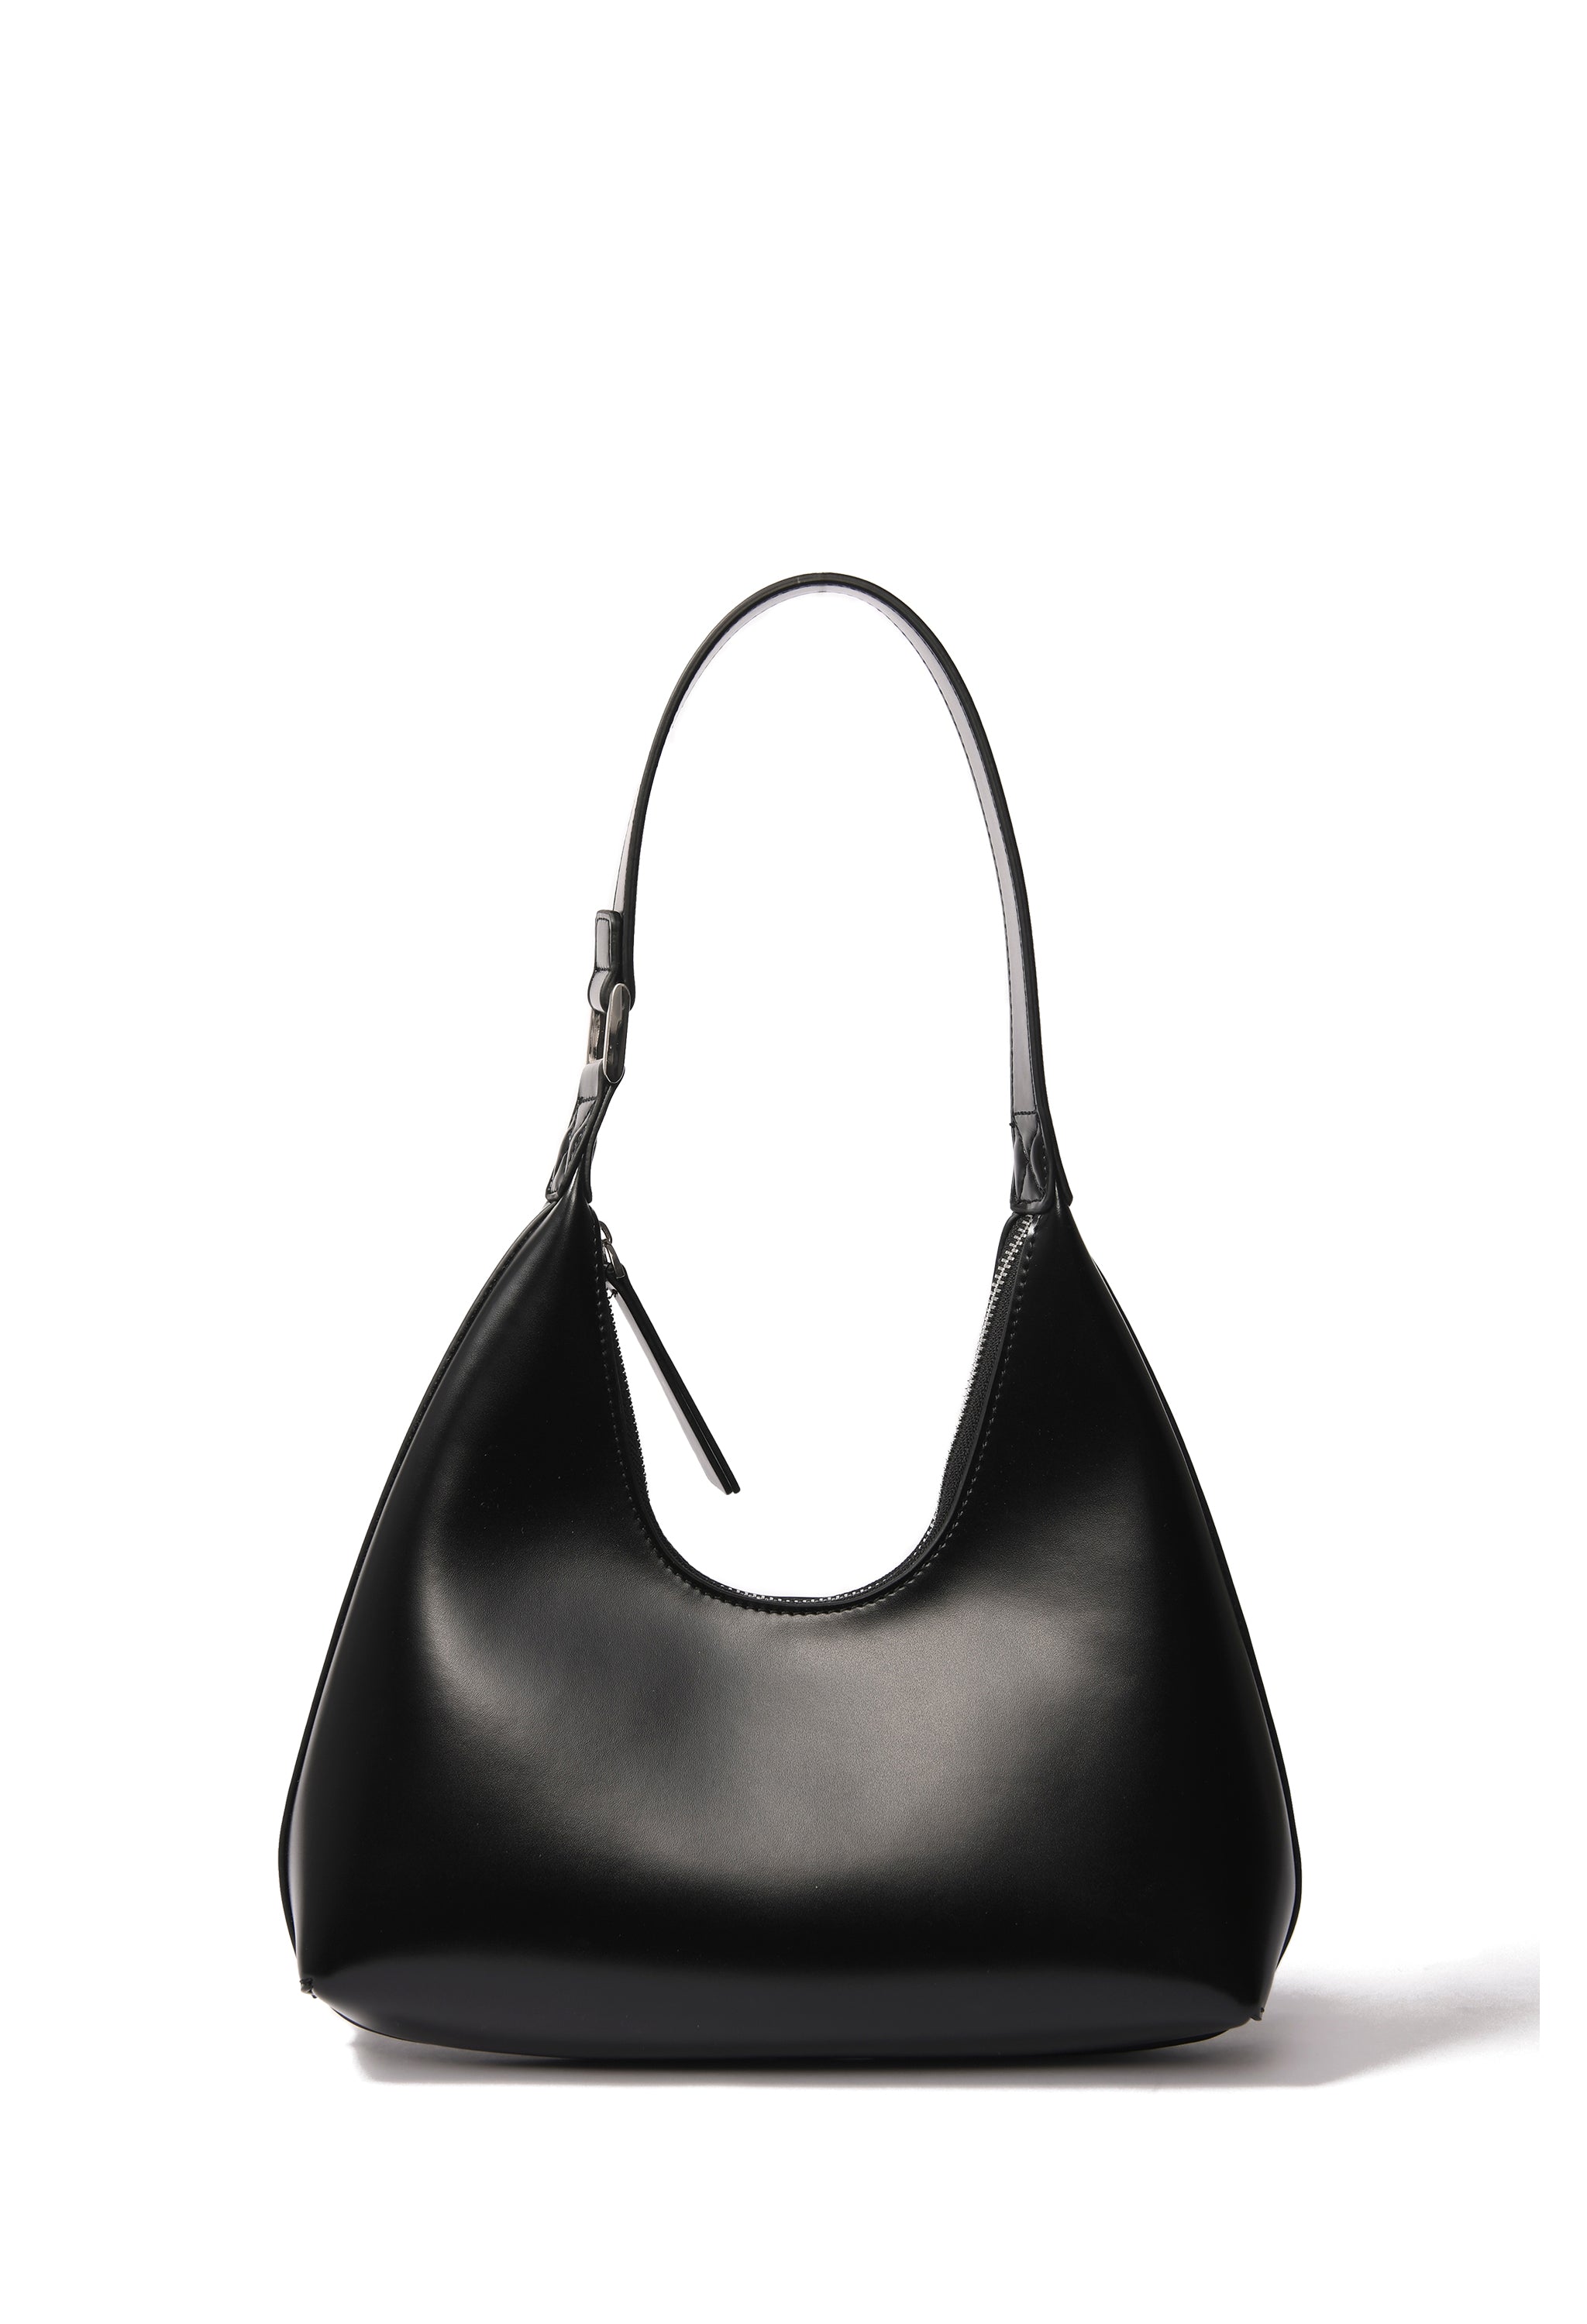 Alexia Bag in smooth leather, Black BOB ORE blue collection on sale 2022 3